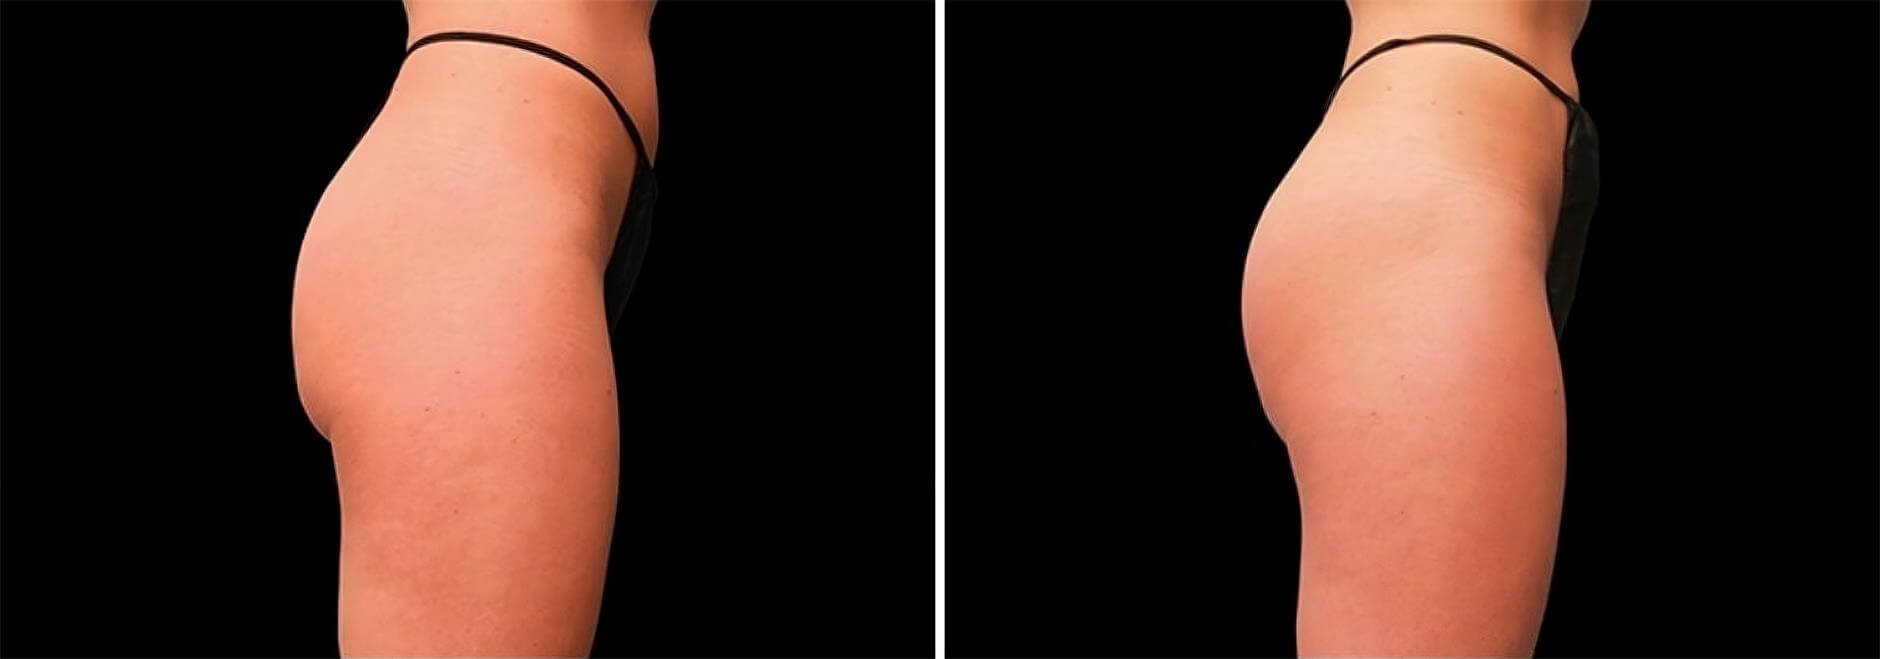 EMSculpt buttrocks before and after image 04